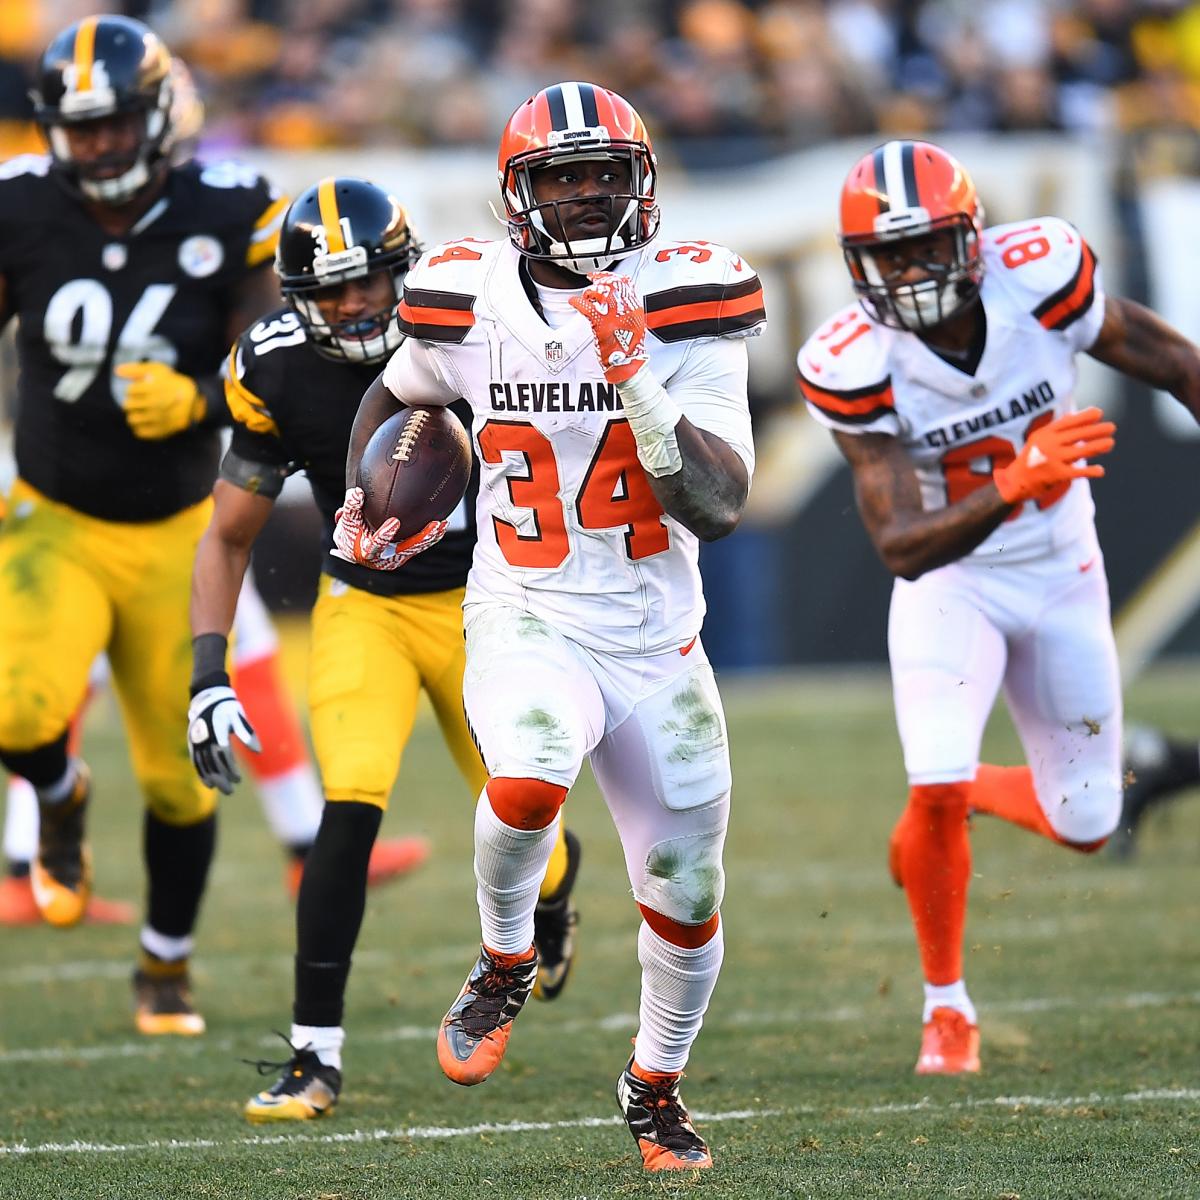 Bleacher Report: Browns receive “A” grade for undrafted free agent